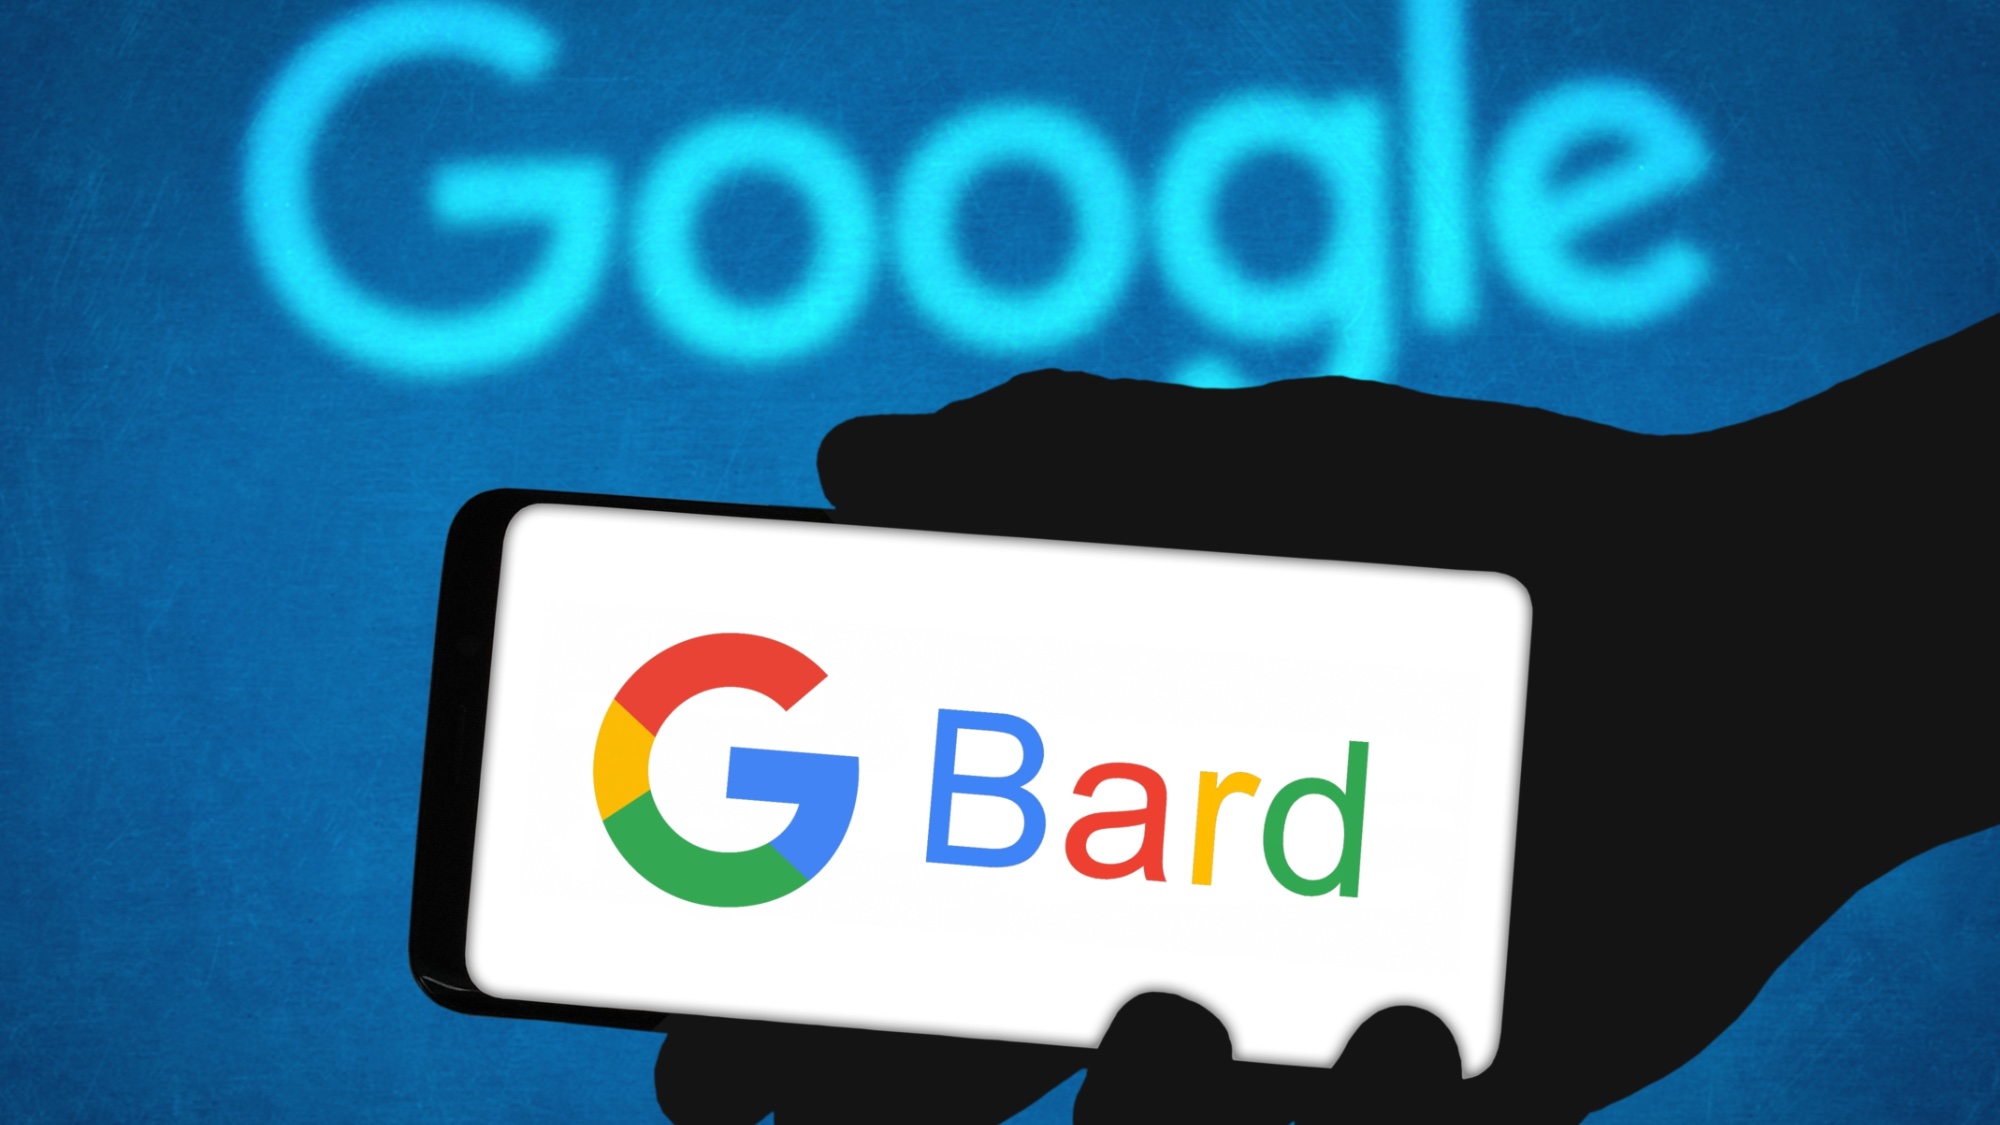 Google Bard is coming to smartphones from Pixel devices soon